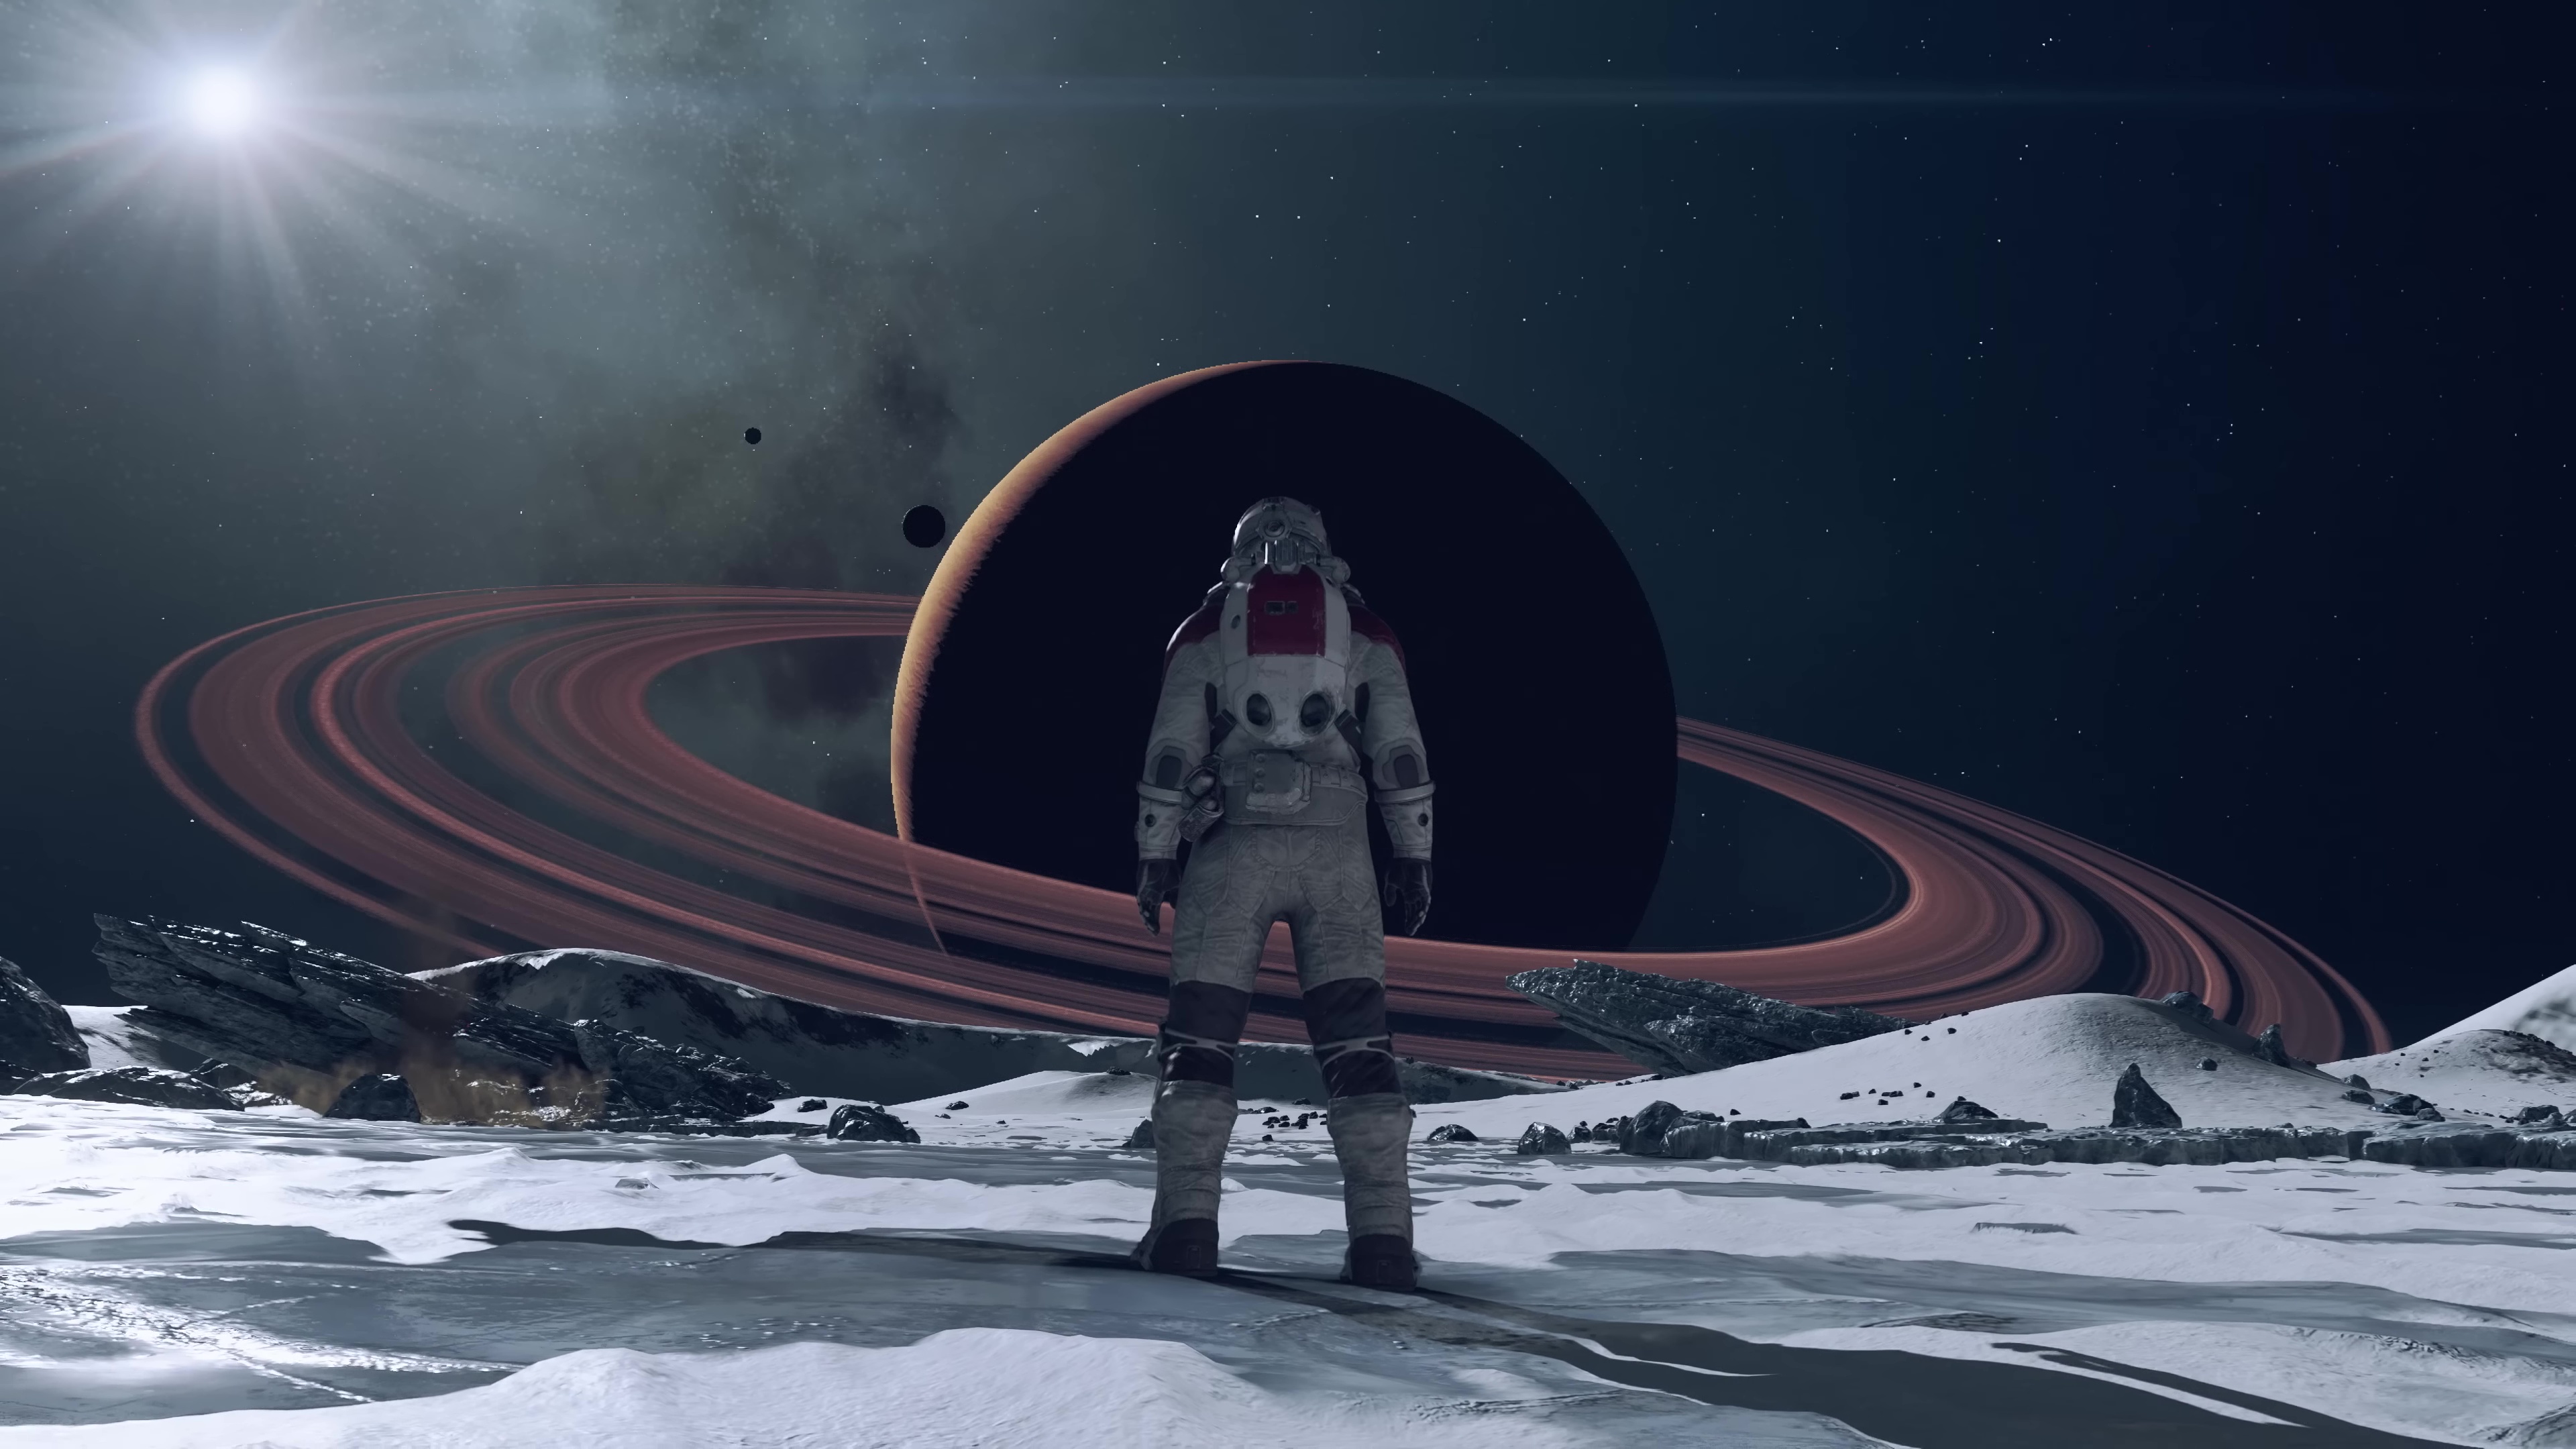 in a screenshot from Starfield, an astronaut, seen from behind, stands on an icy planet and looks toward a Saturn-like ringed planet in the distance, with a sunlike star shining in the upper left corner